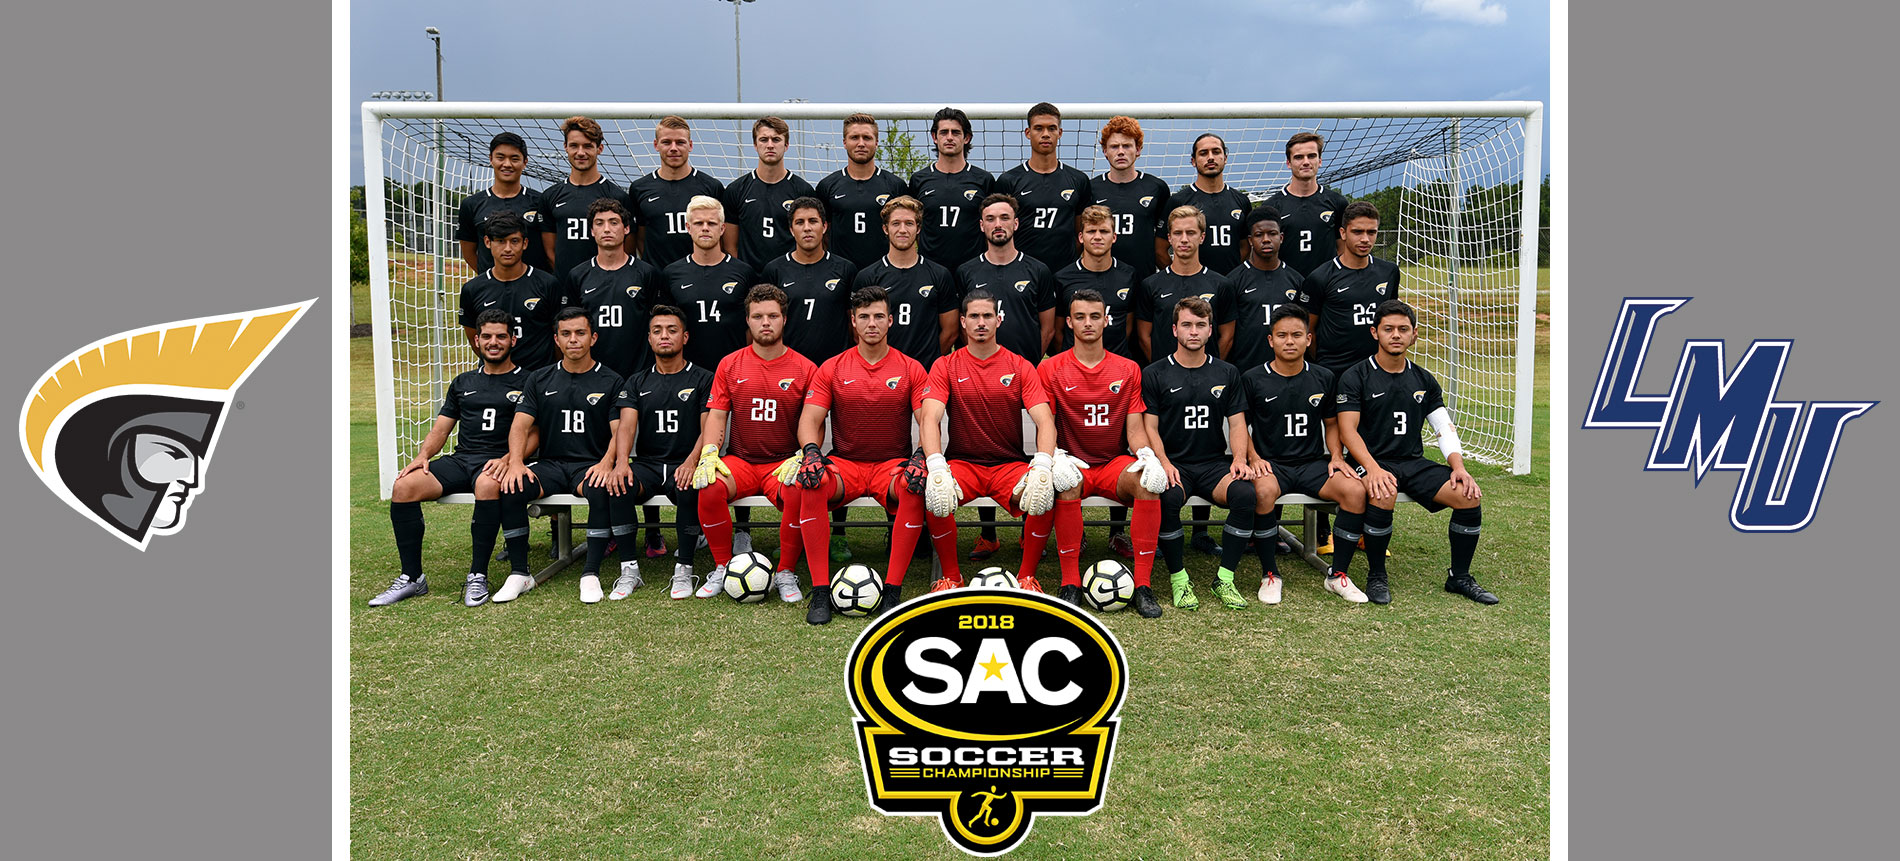 No. 4 Trojans Set to Host No. 5 Lincoln Memorial in Opening Round of the SAC Championship